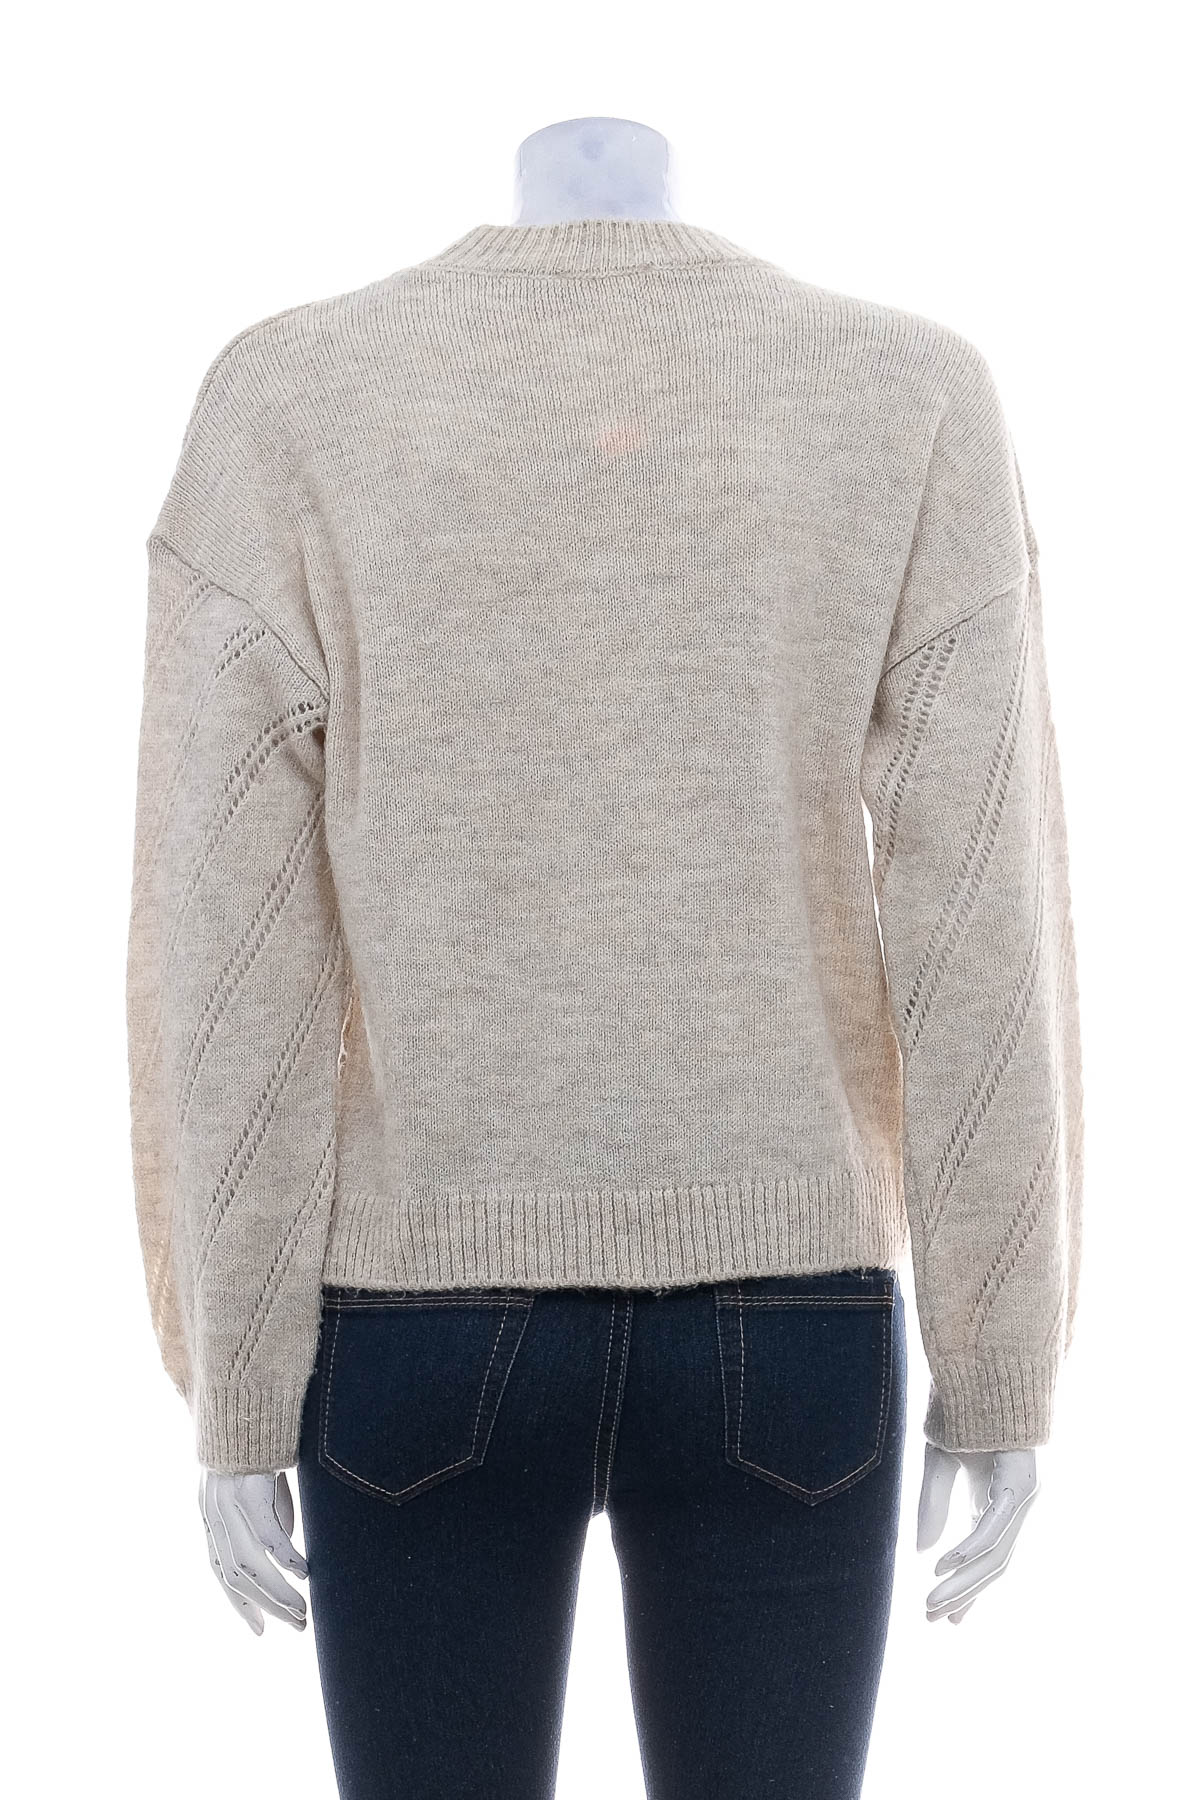 Women's sweater - MNG Casual - 1